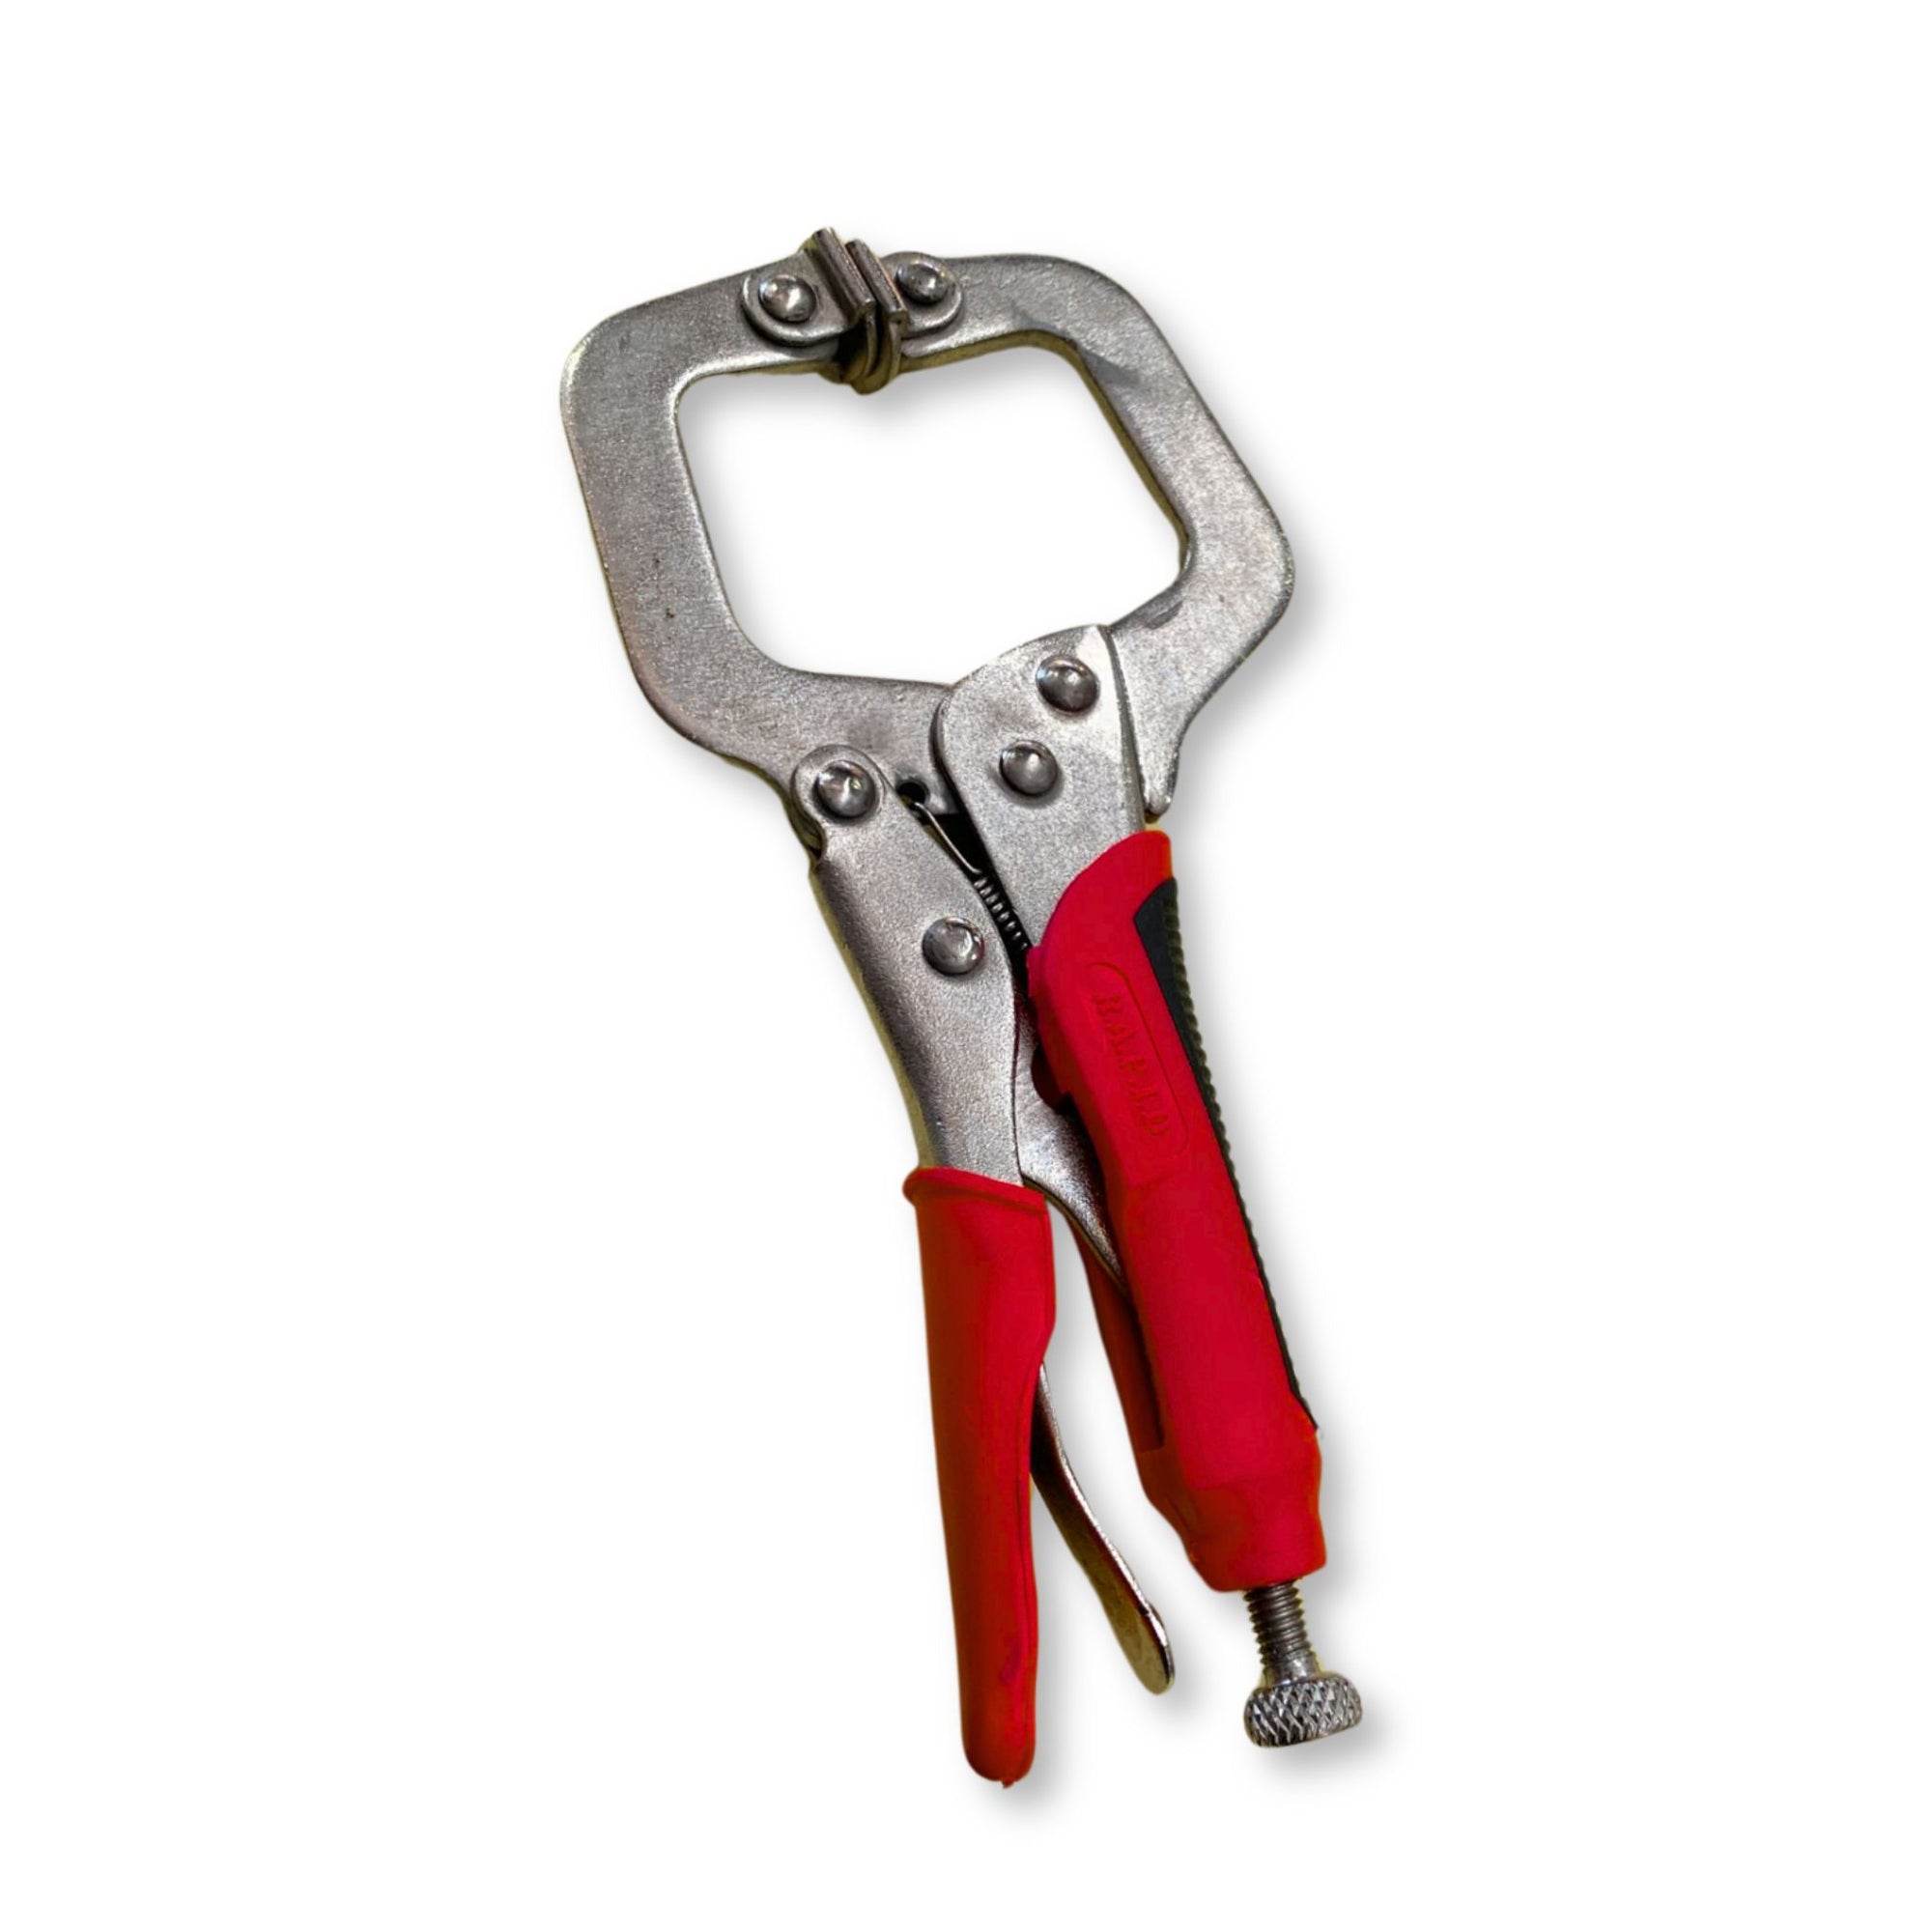 7" C Clamp Locking Pliers - South East Clearance Centre